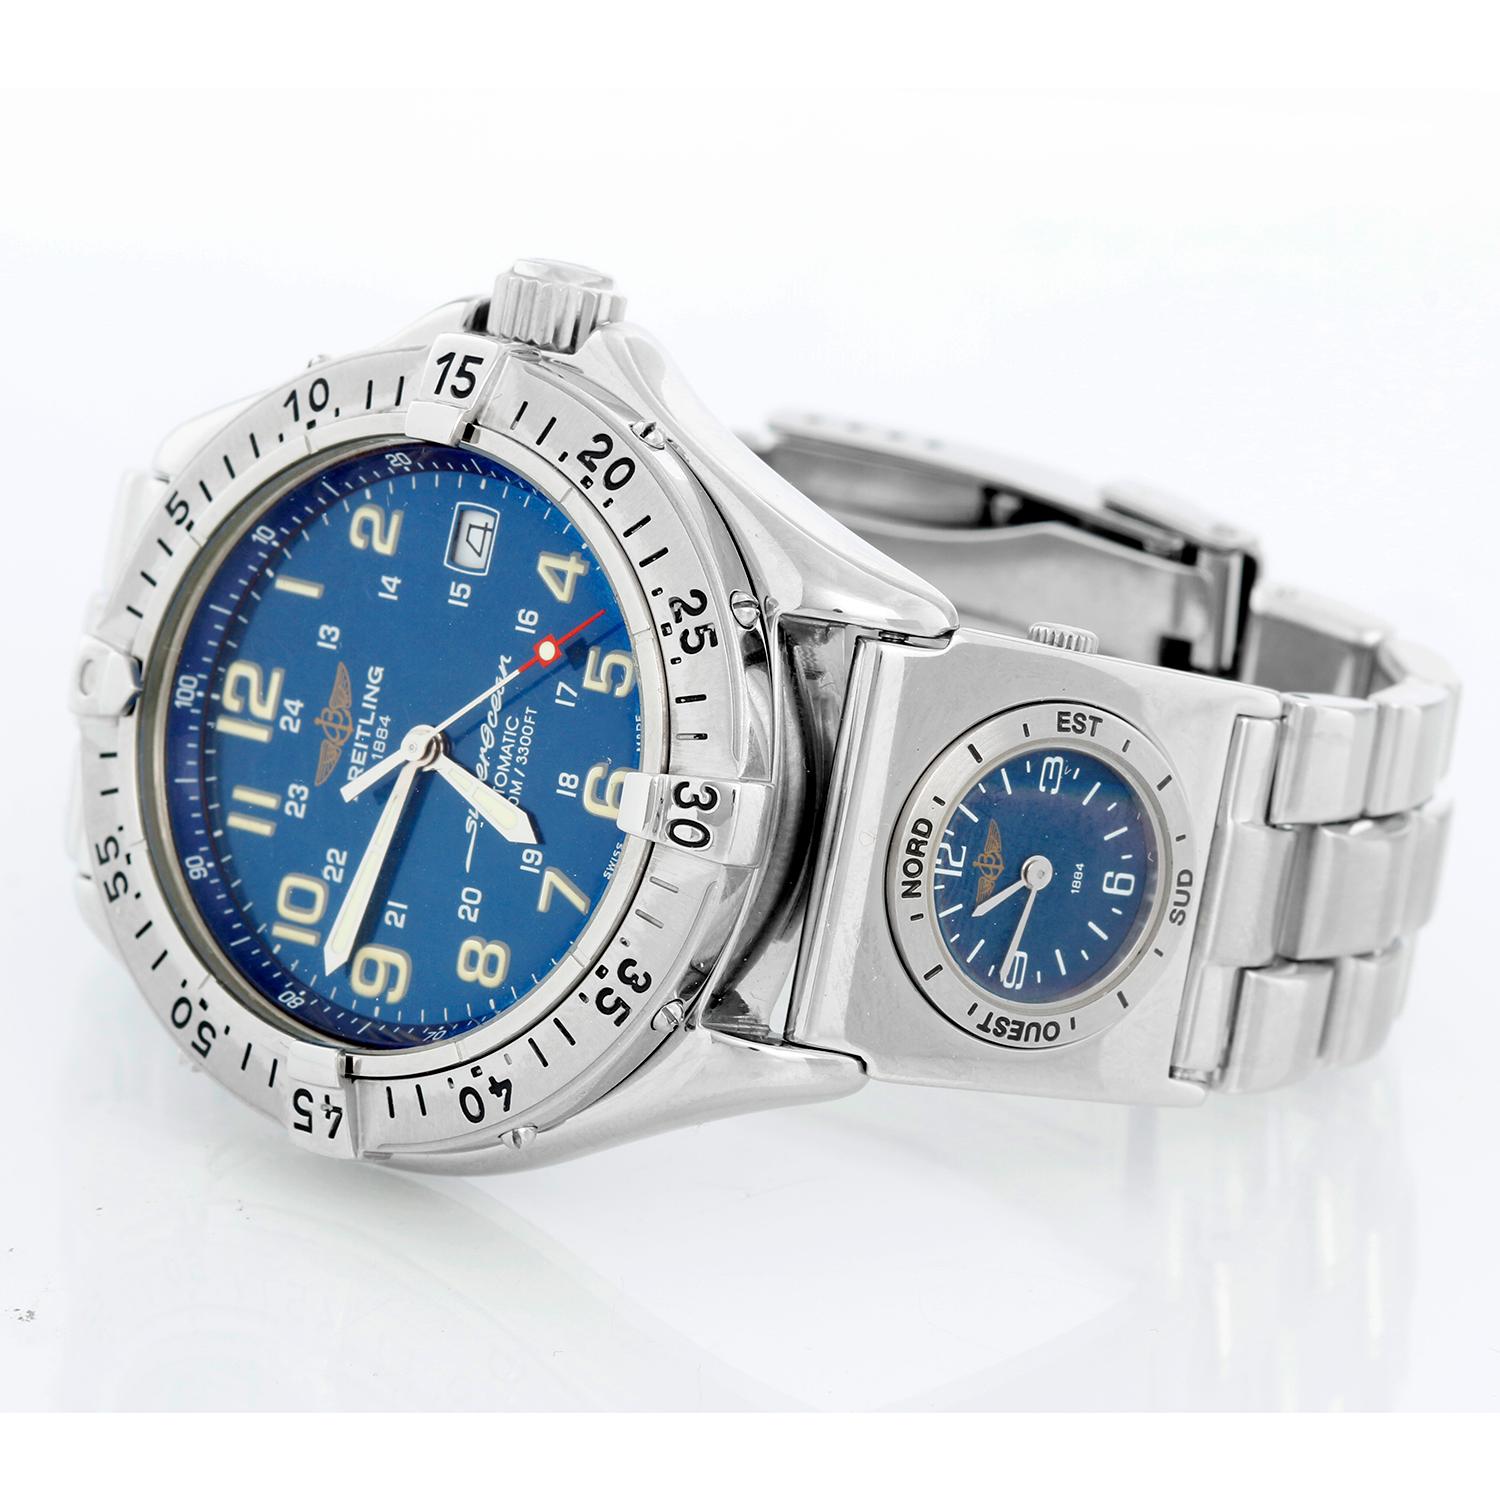 Breitling SuperOcean A17040 With UTC Modul A61172 - Automatic. Steel case ( 41mm). Blue dial with luminous Arabic numerals. Stainless steel bracelet with Breitling UTC modul clock a61172; Fits a 7 1/4 inch wrist . Pre-owned with Breitling box and